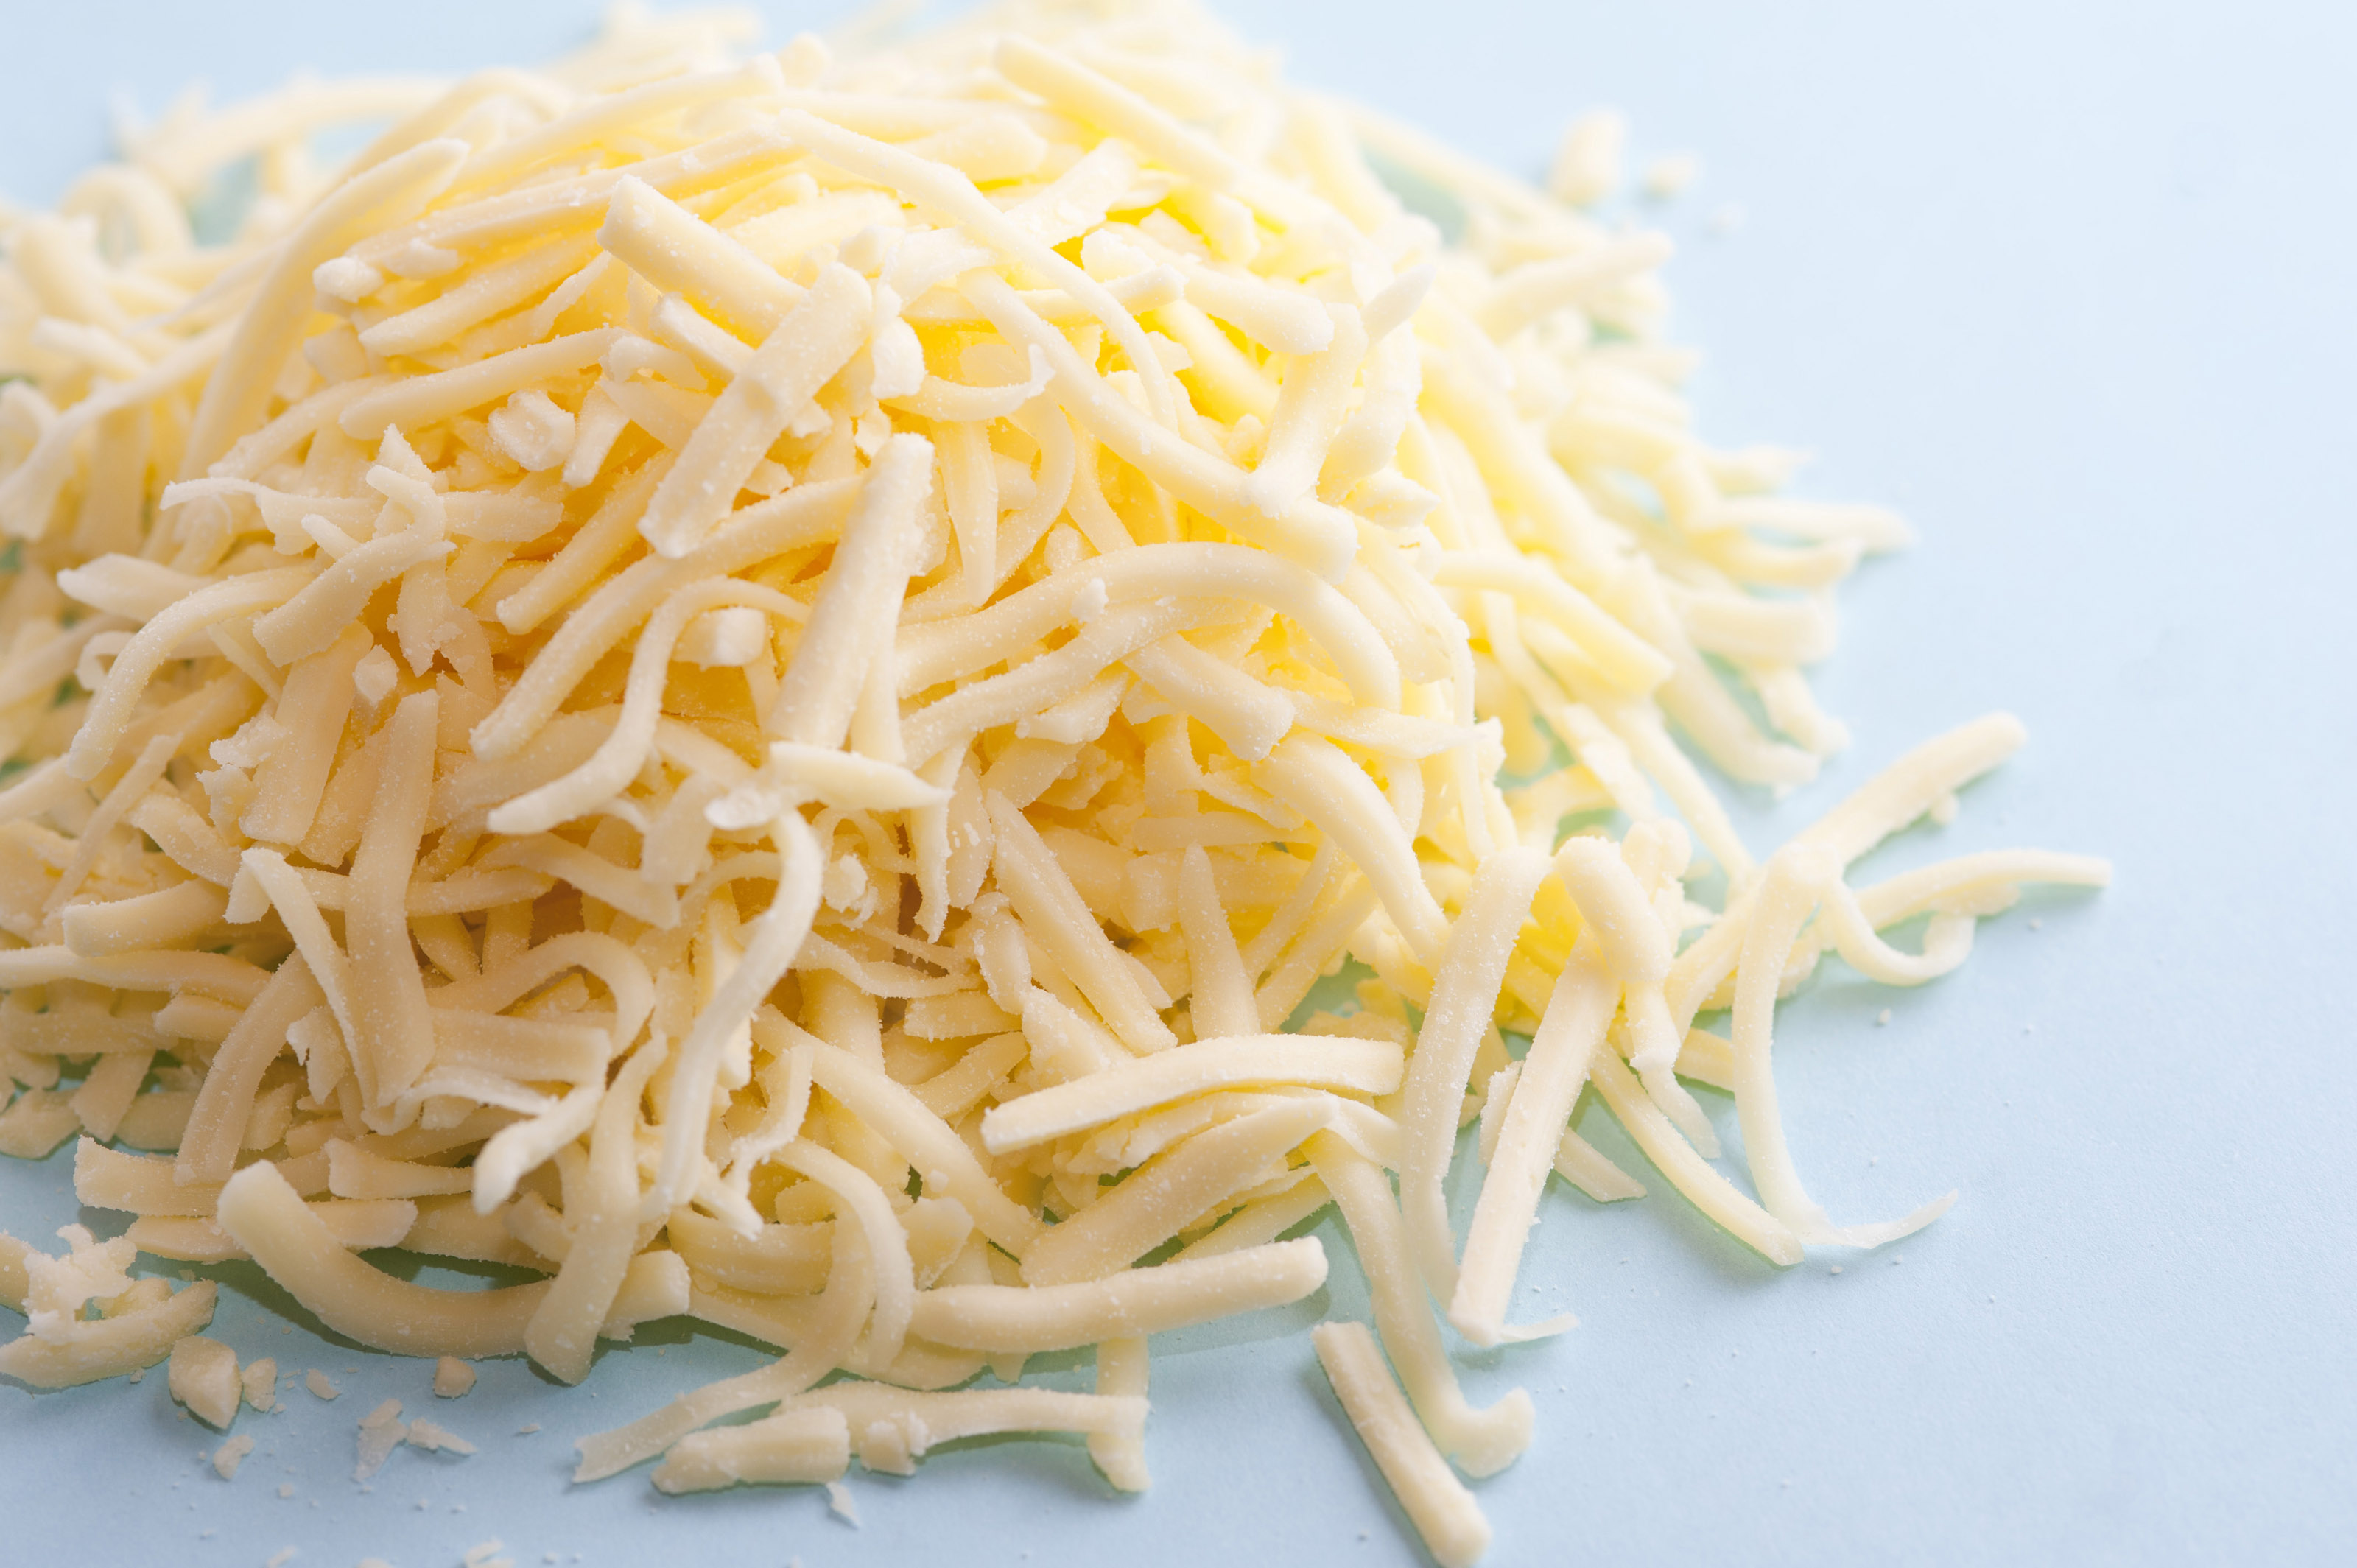 grated_cheese.jpg